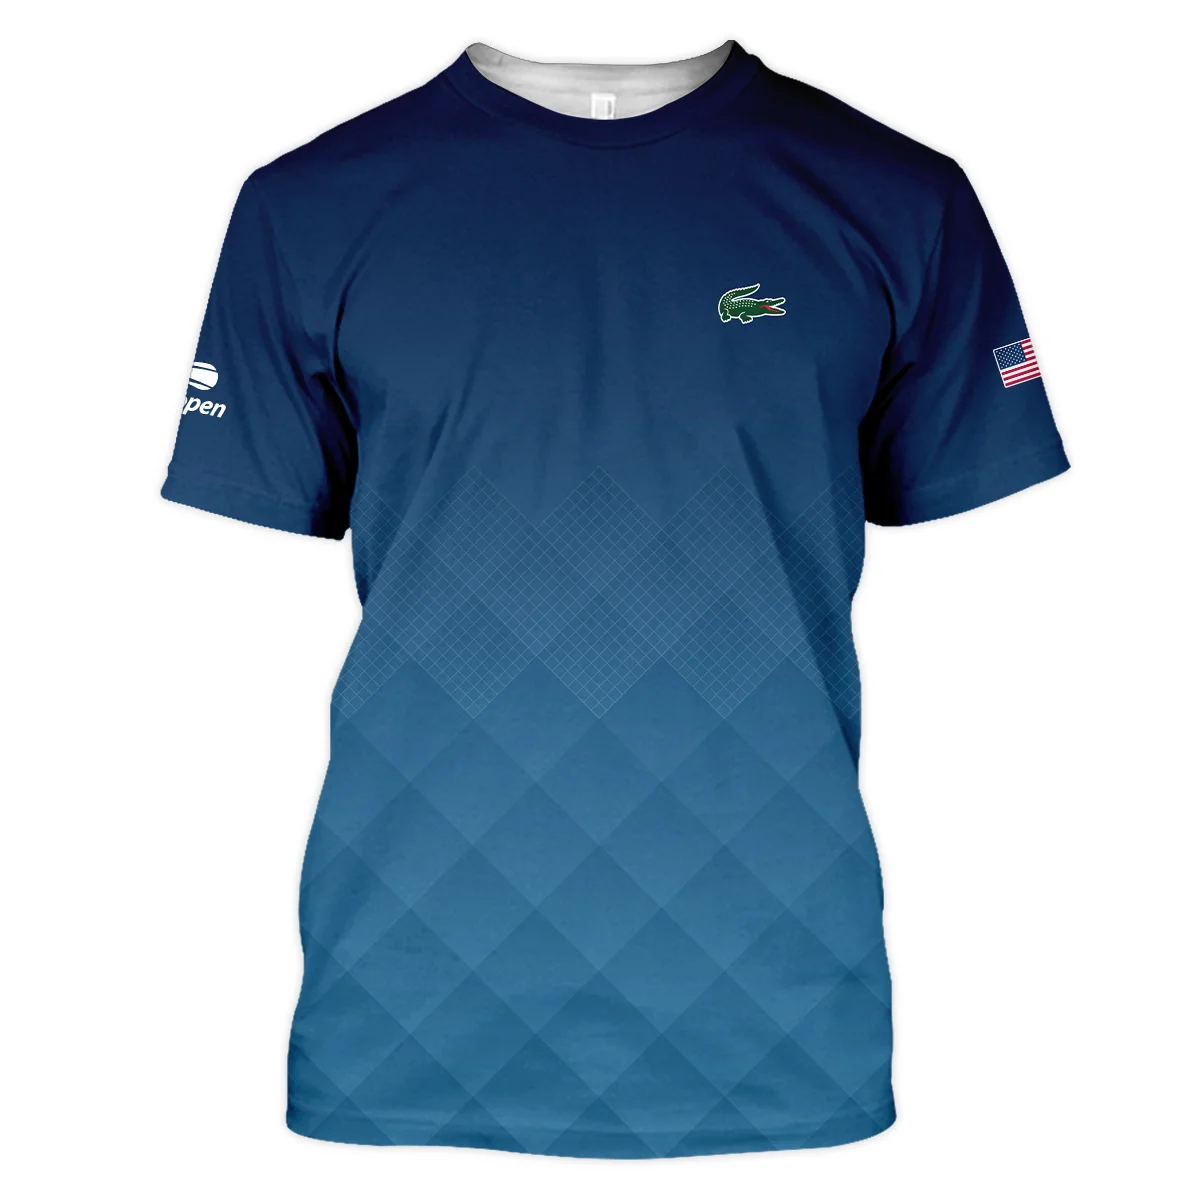 Lacoste Blue Abstract Background US Open Tennis Champions Polo Shirt Style Classic Polo Shirt For Men